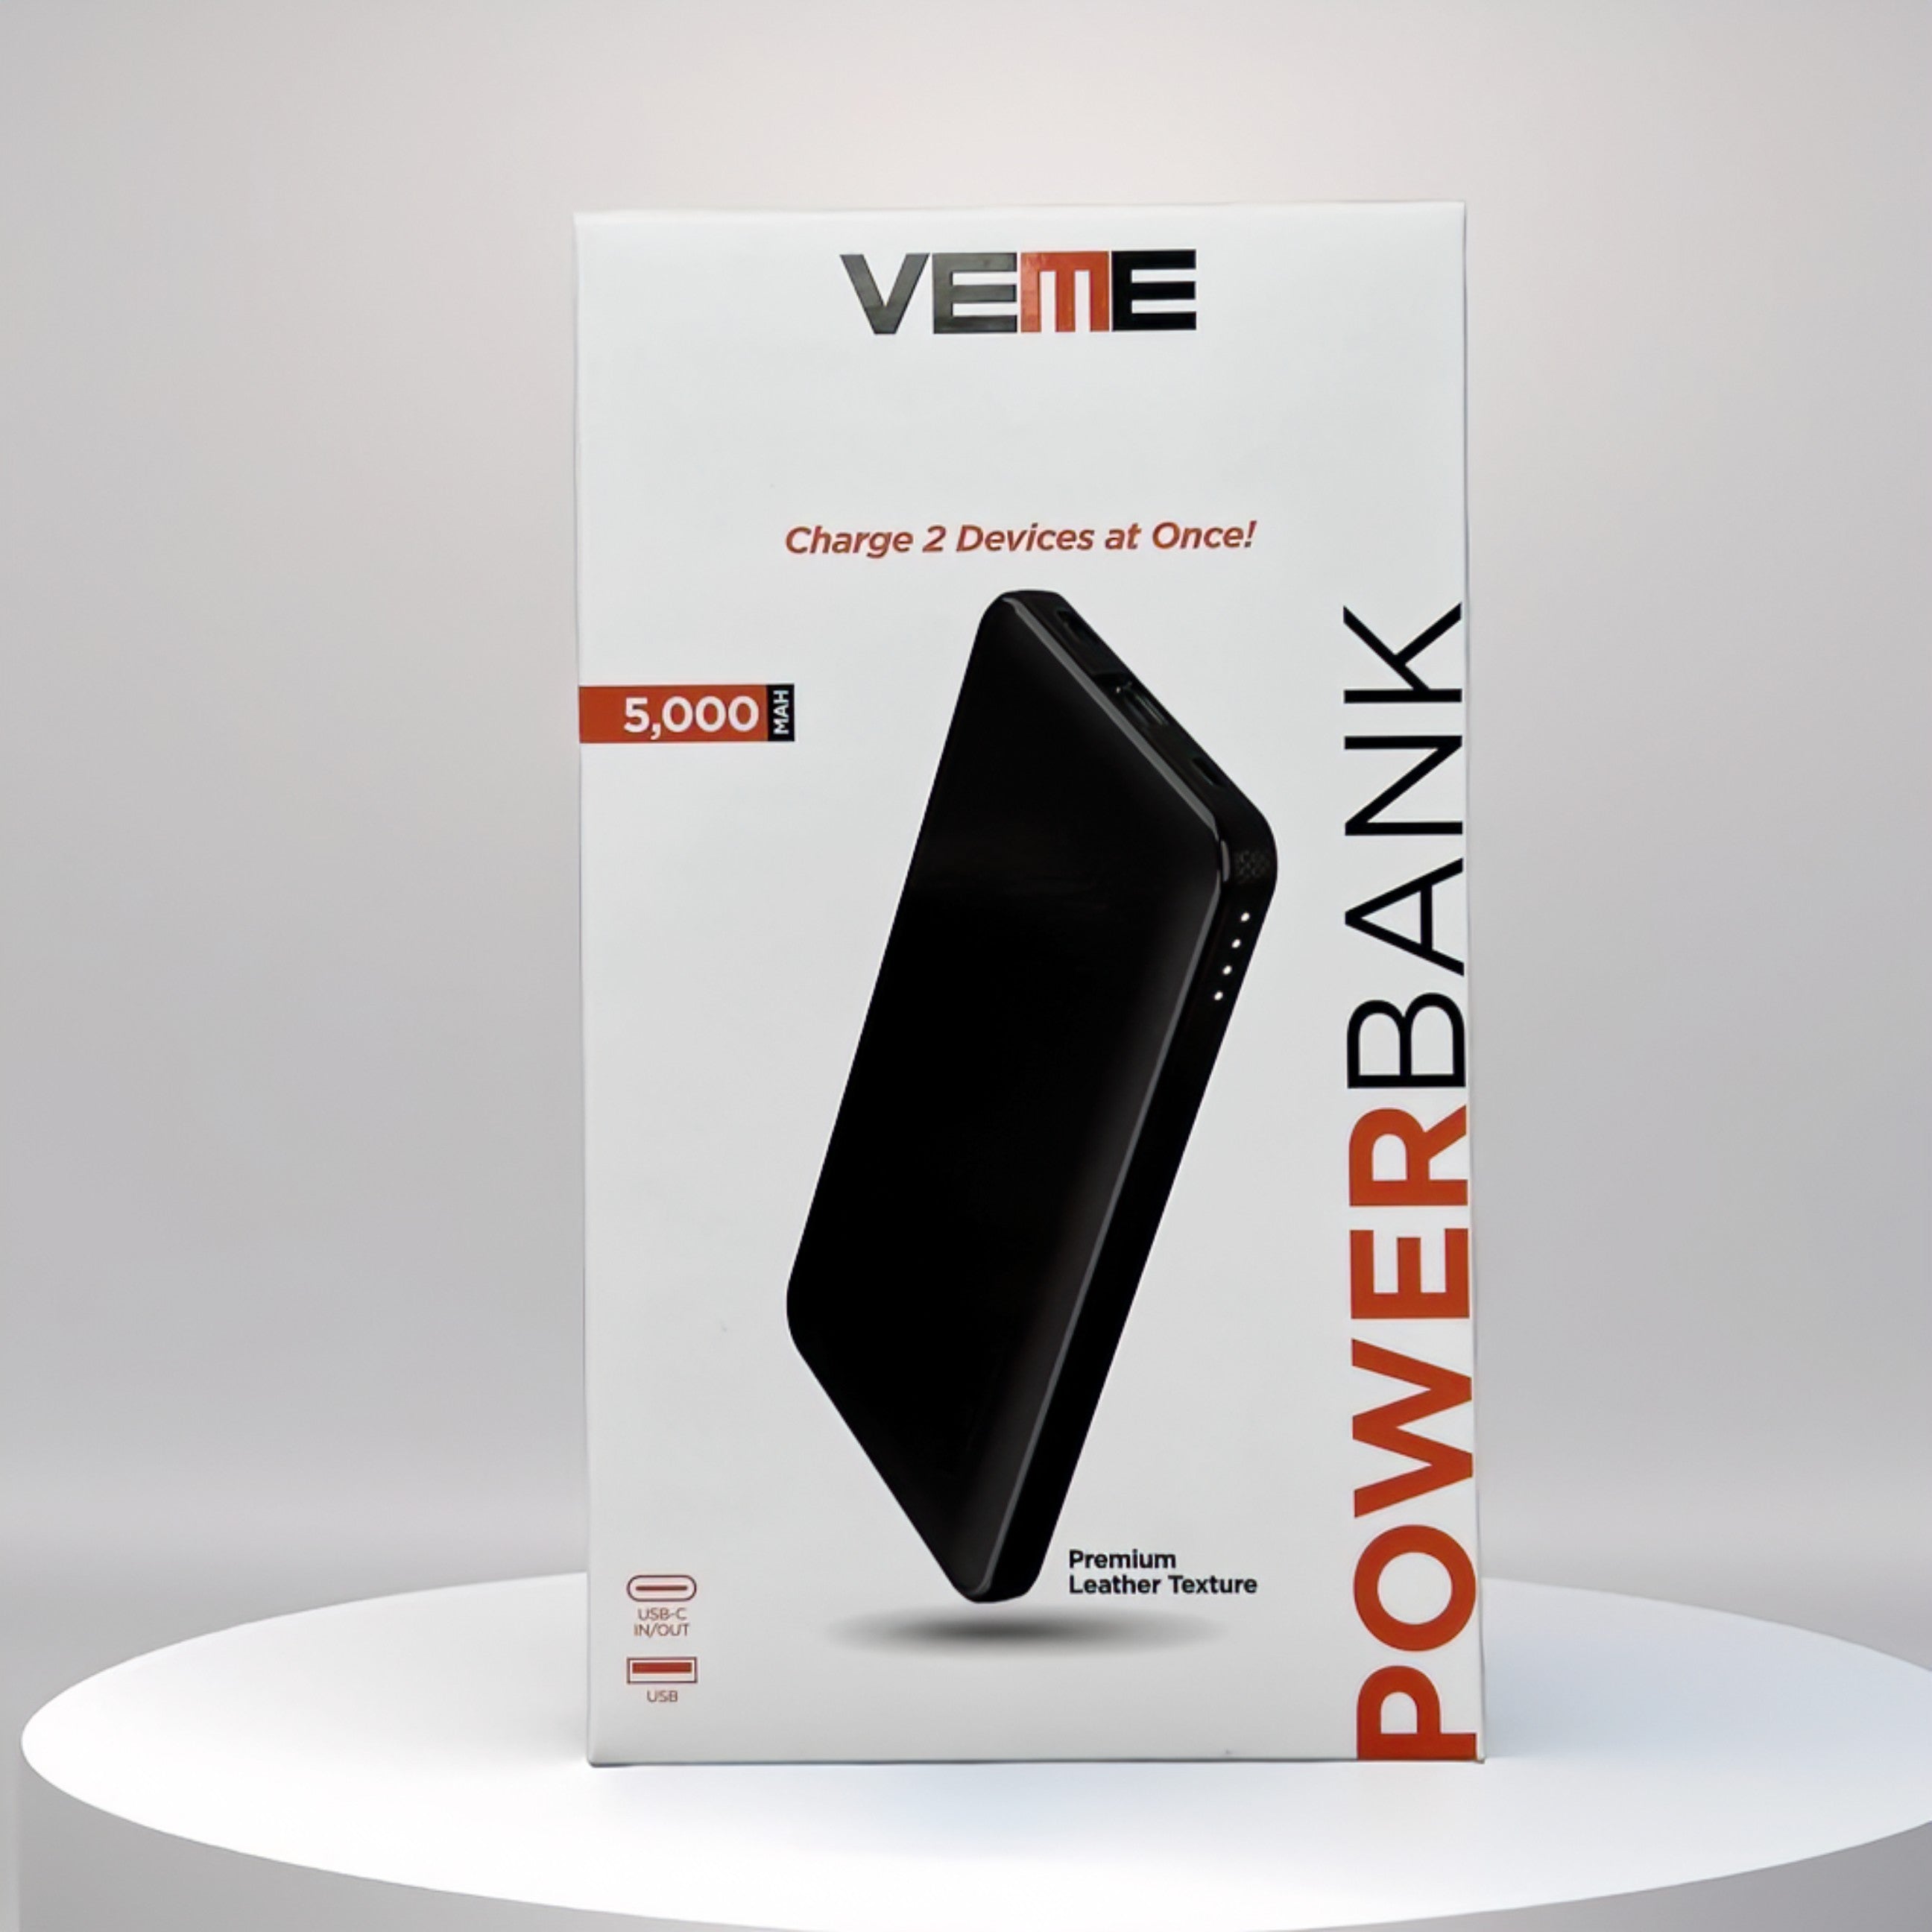 VEME Power Bank With USB-C, USB-A and Micro-USB Ports- Black (4 Count)